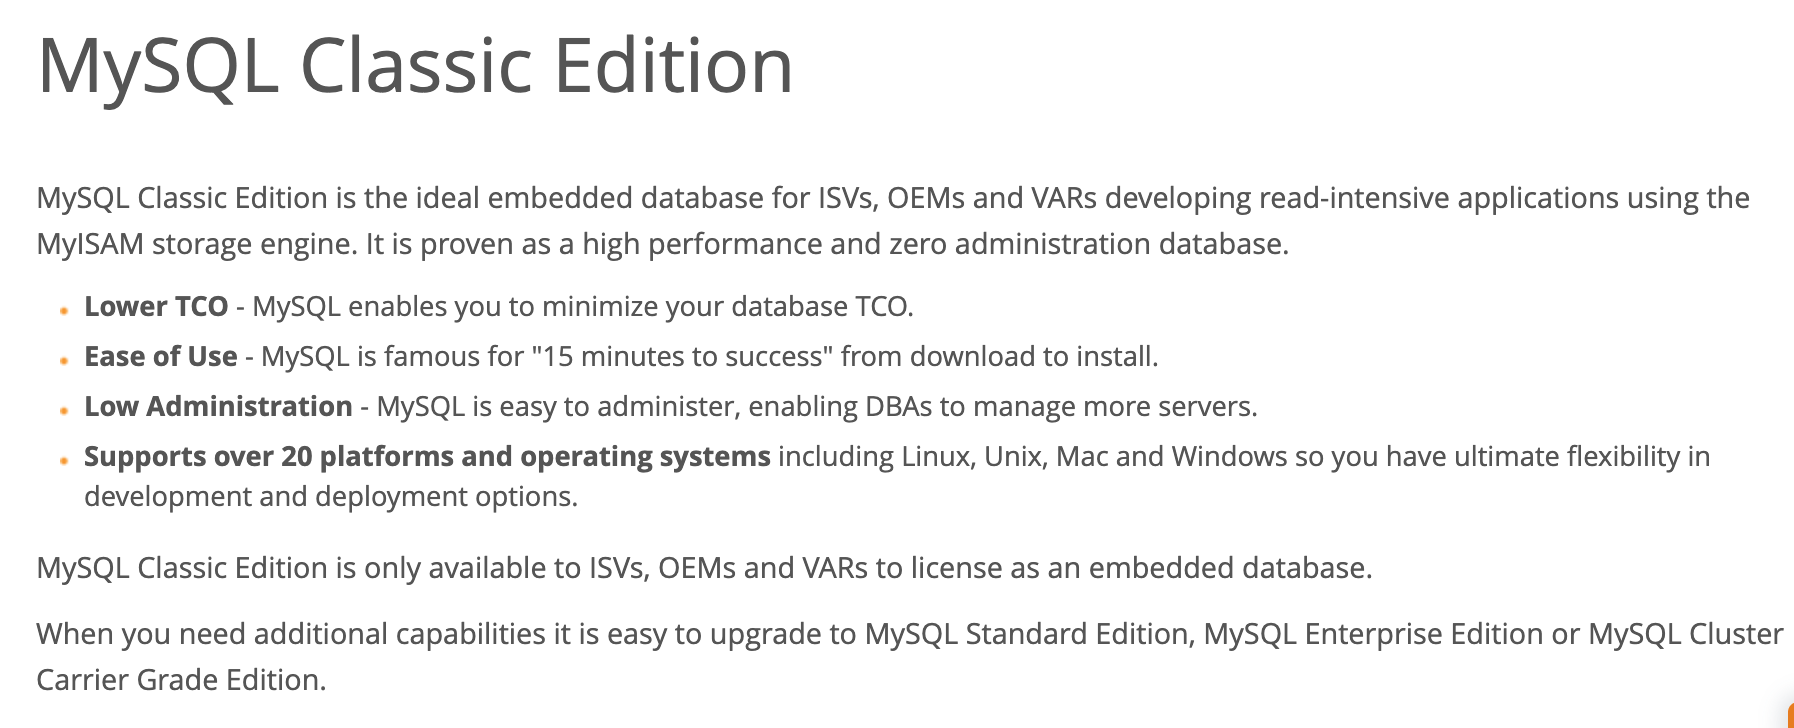 MySQL Classic Edition is only available to ISVs, OEMs and VARs to license as an embedded database.